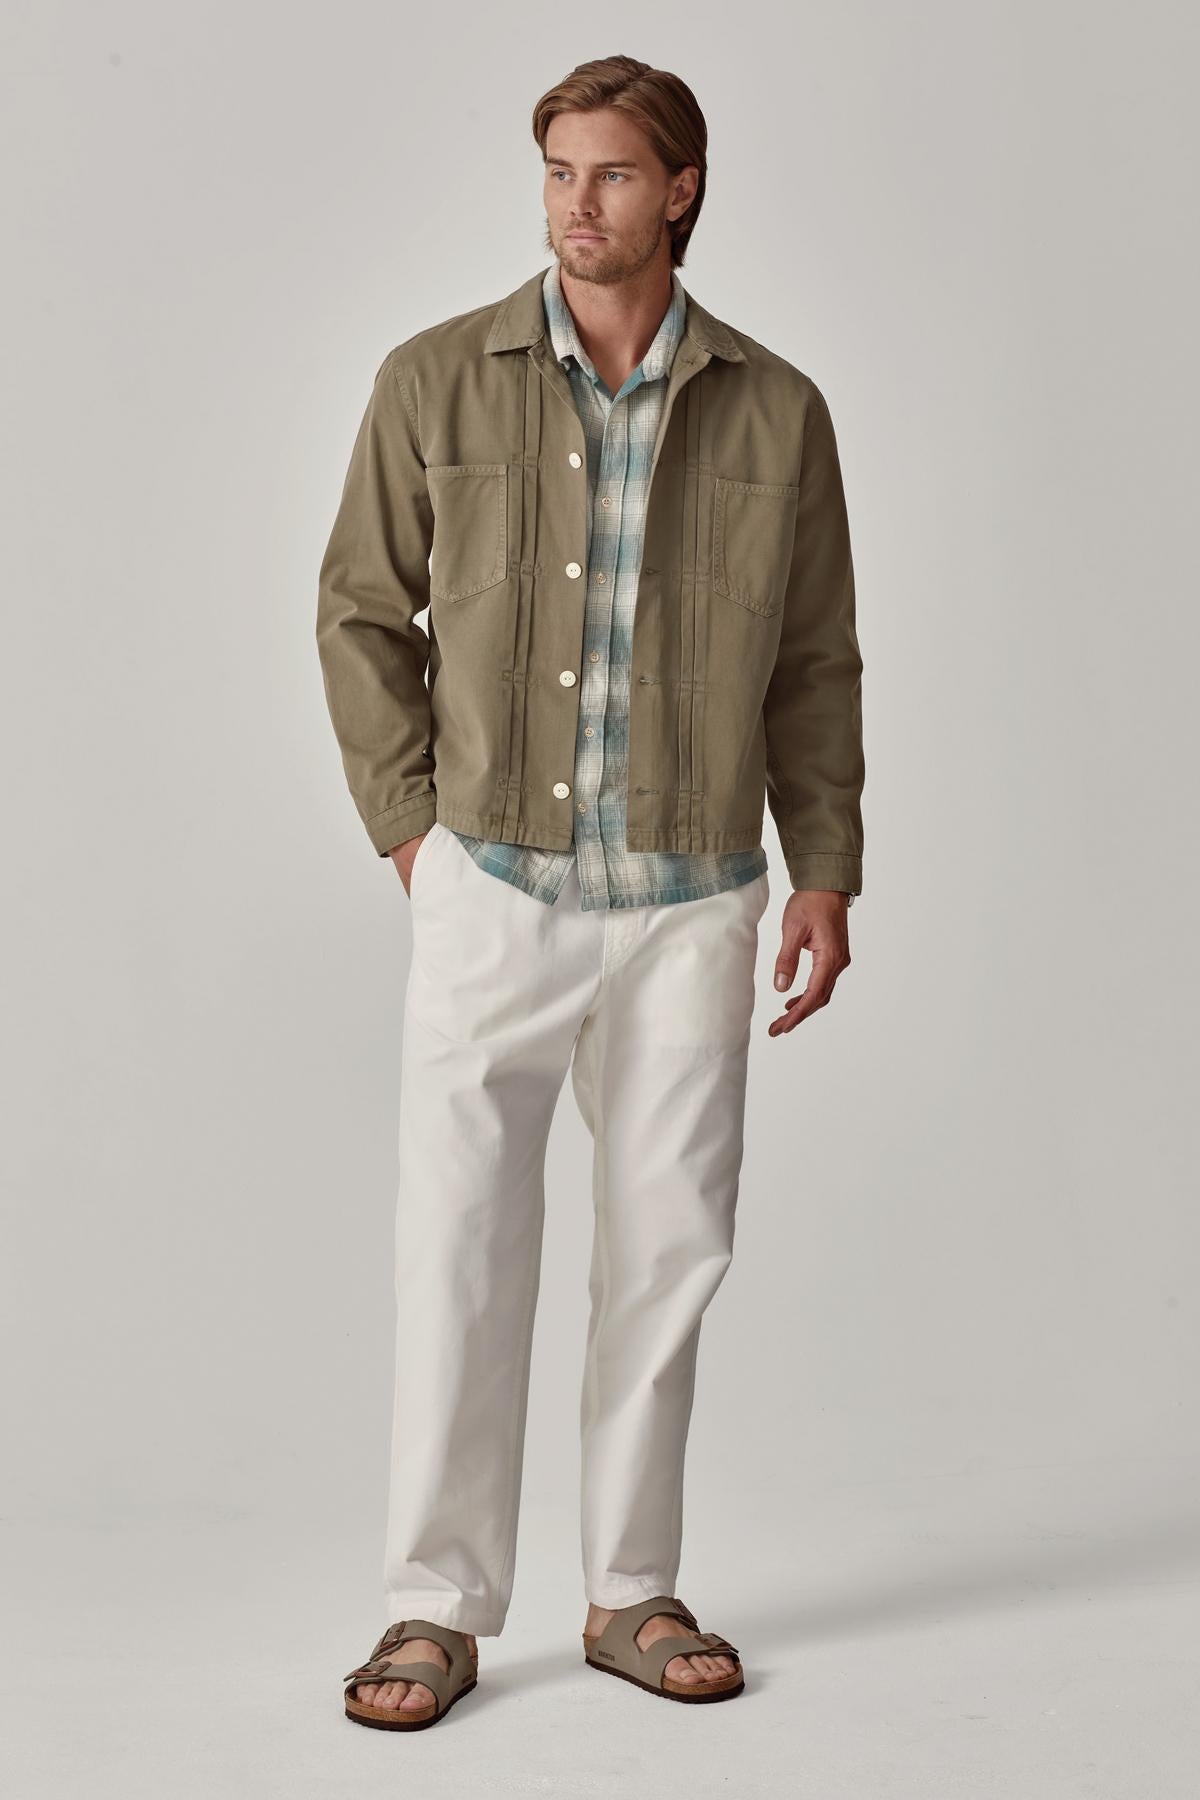 A man in a casual outfit featuring a green jacket, plaid shirt, BRANSON PANT by Velvet by Graham & Spencer with an elastic drawstring waist, and brown sandals.-36443154415809